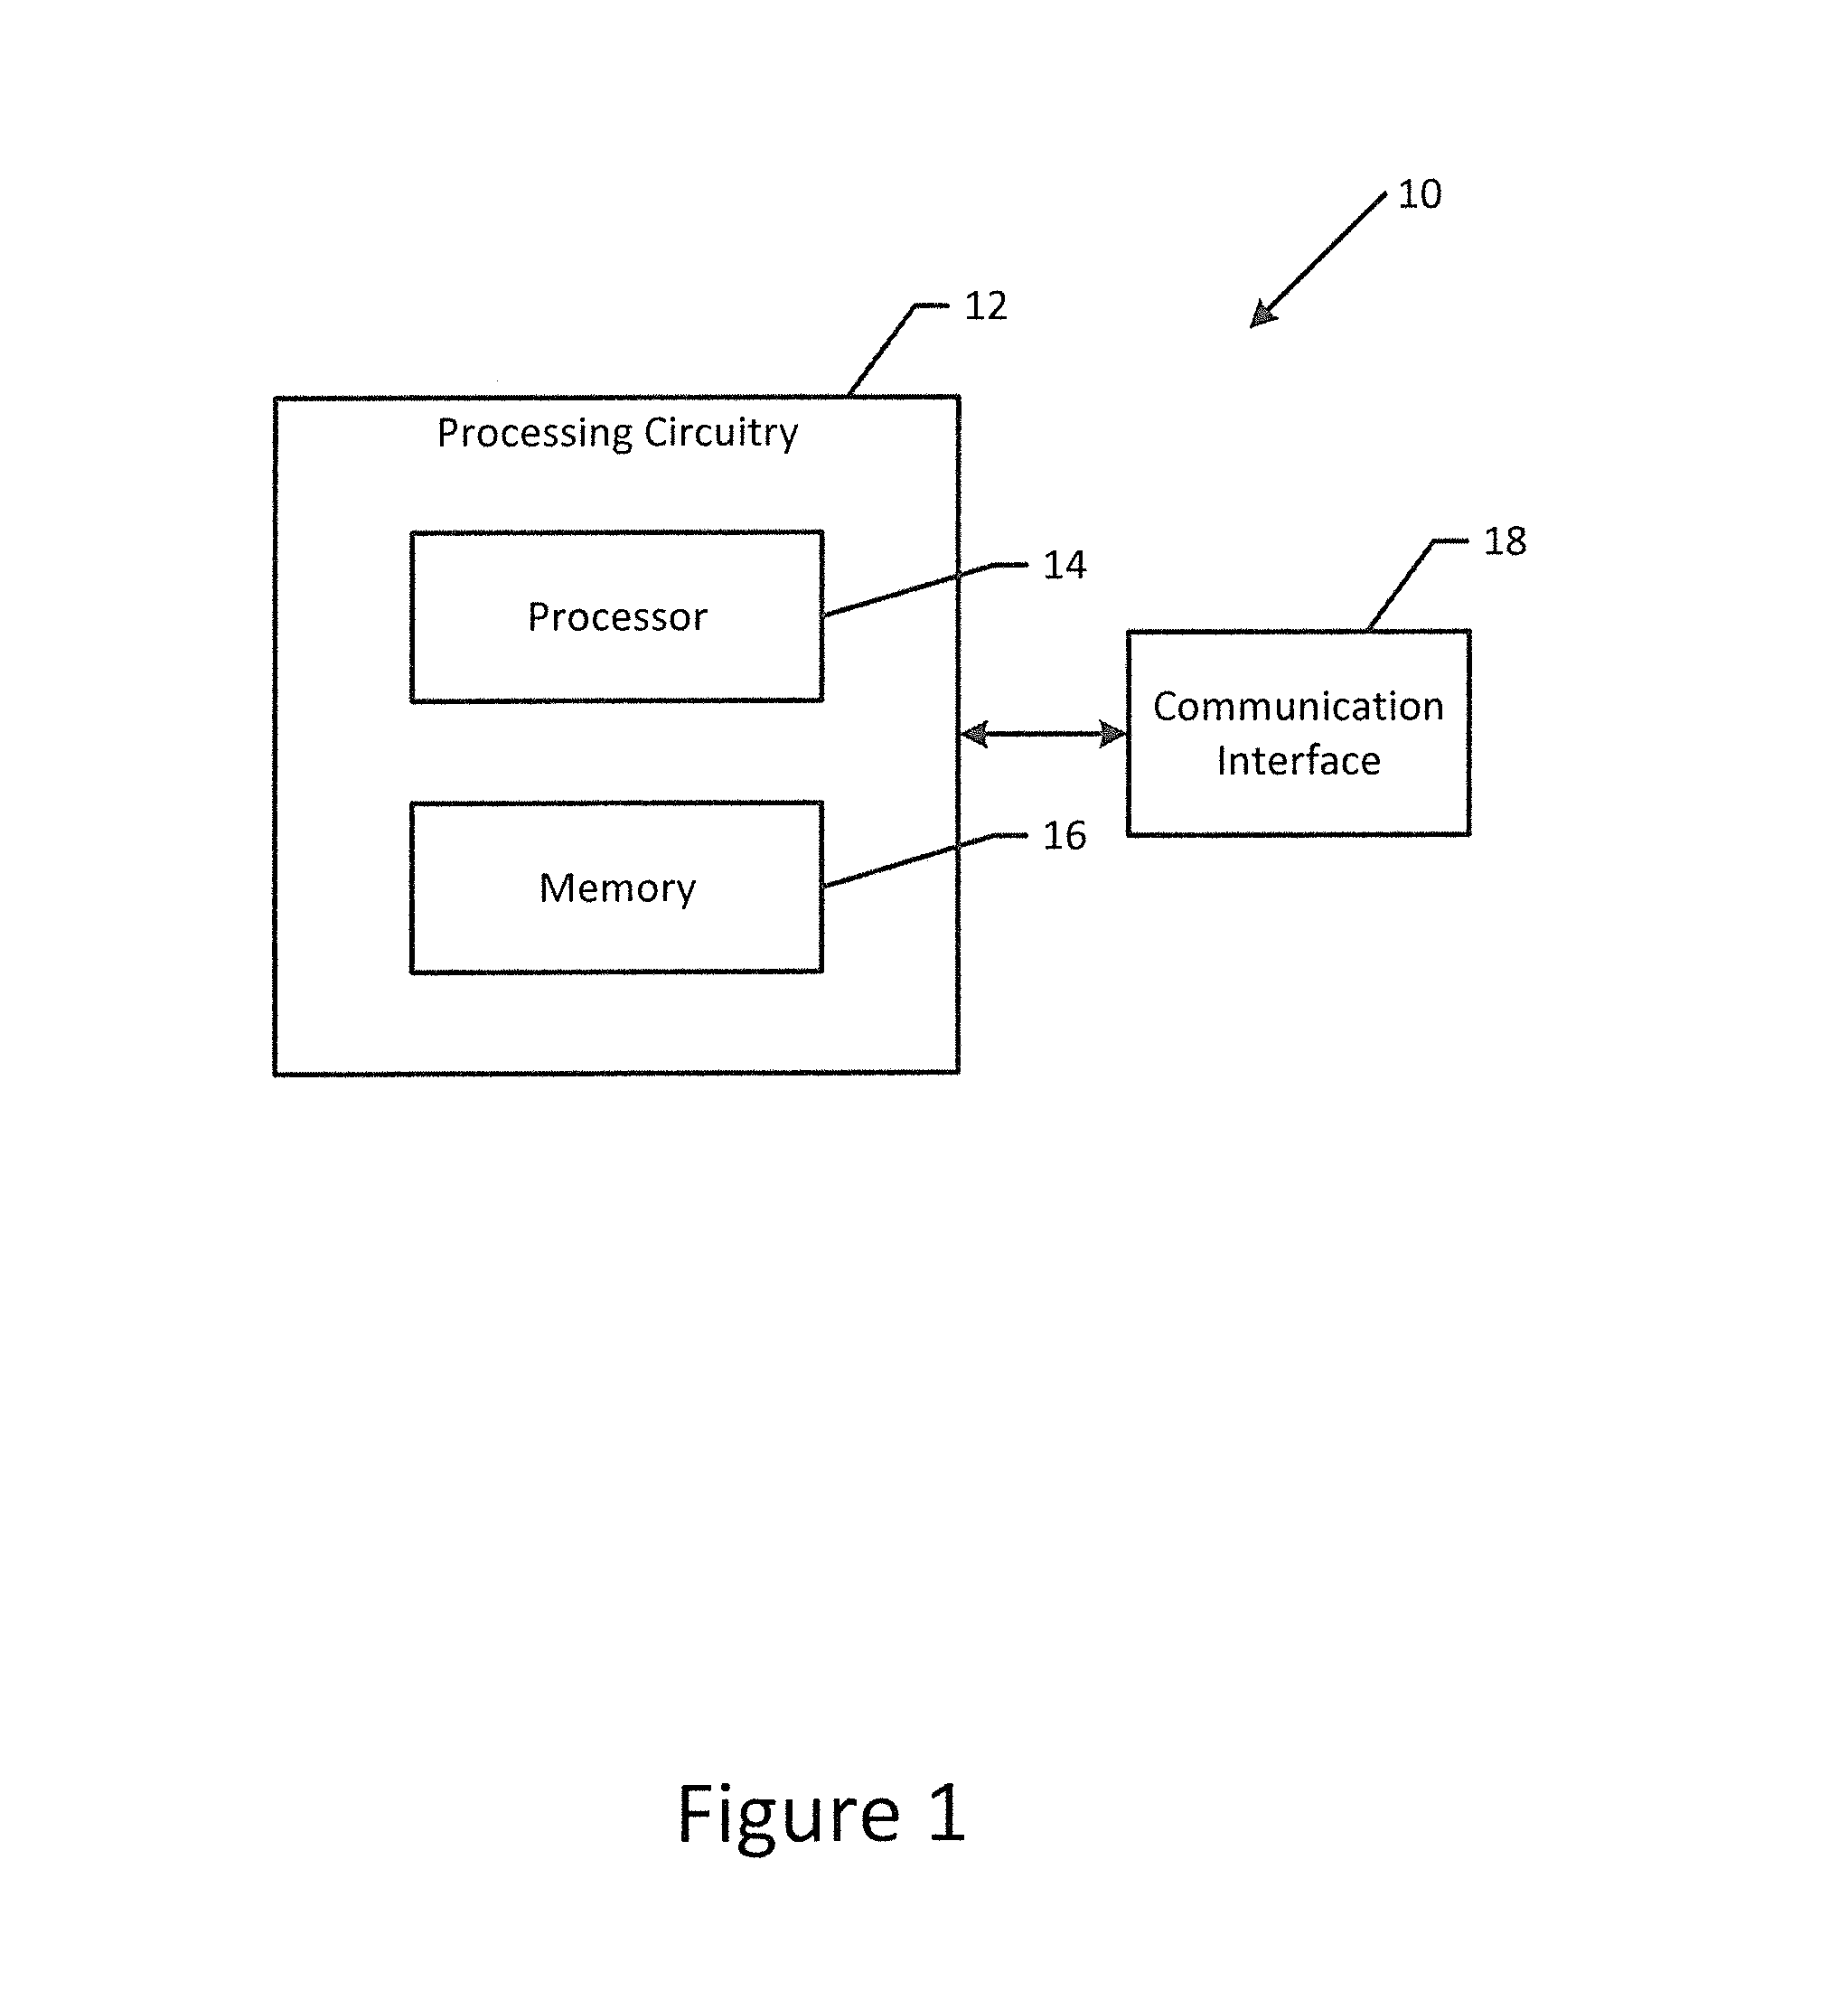 Health care information system and method for securely storing and controlling access to health care data